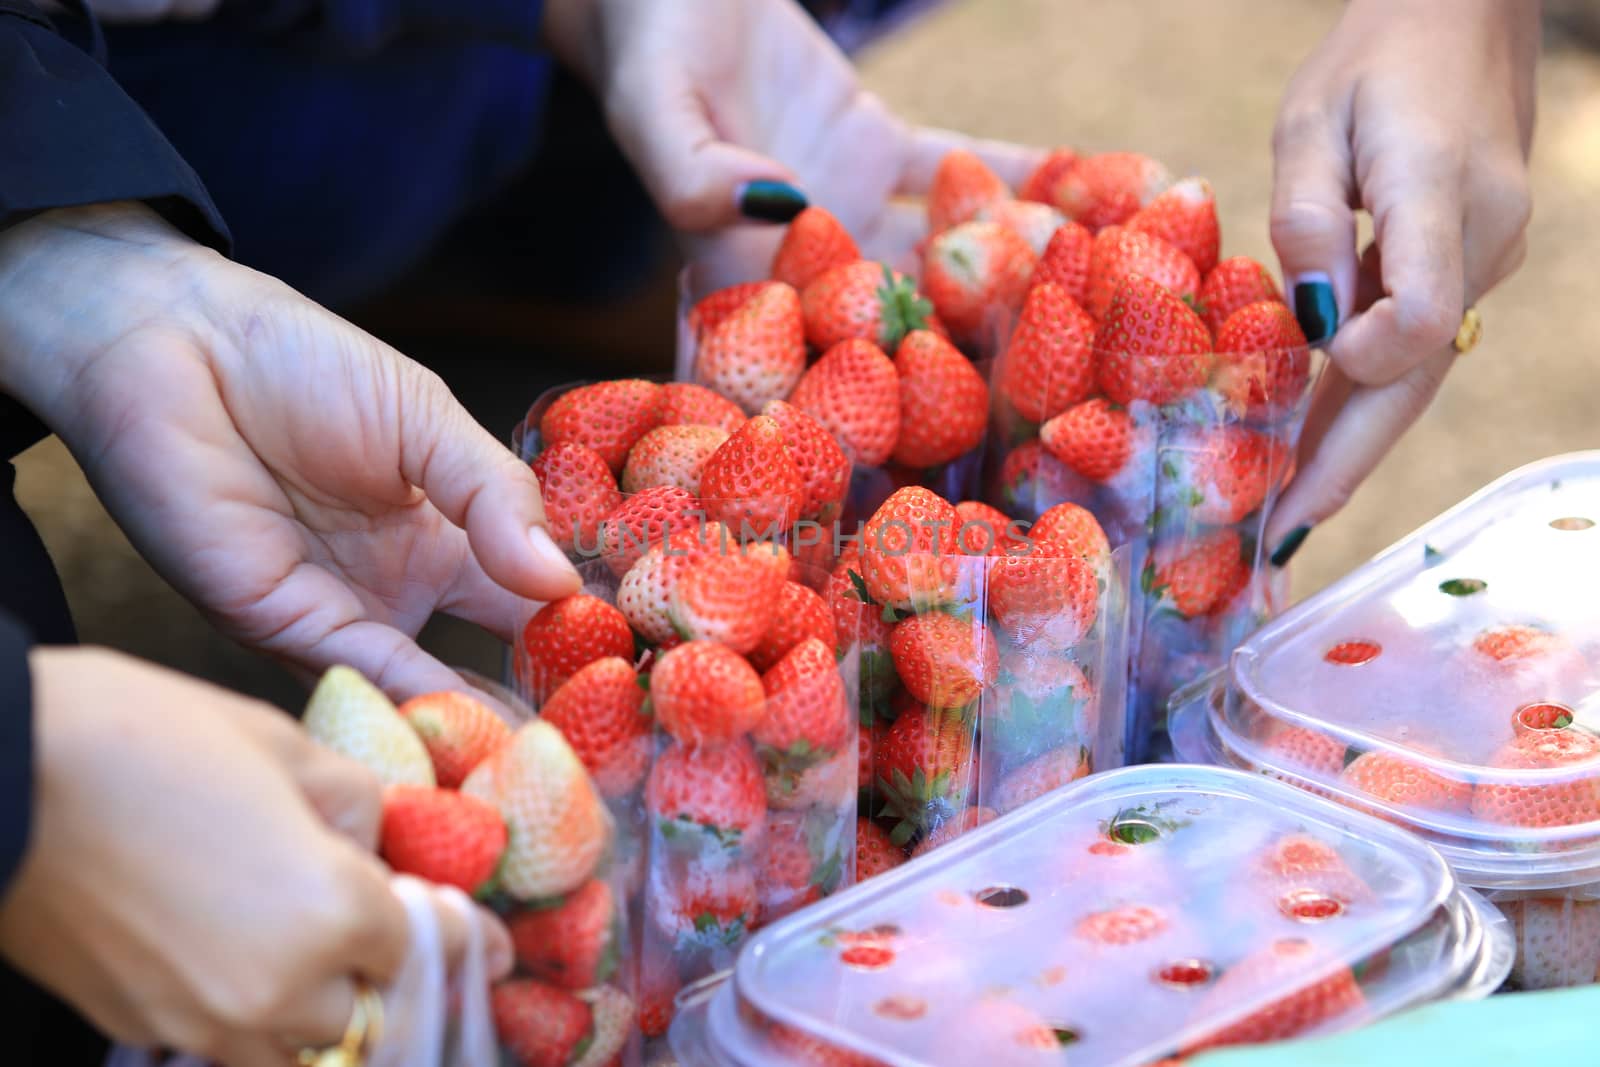 Woman hand buys strawberry from seller,Strawberry in plastic packaging for sell. Focus on hand